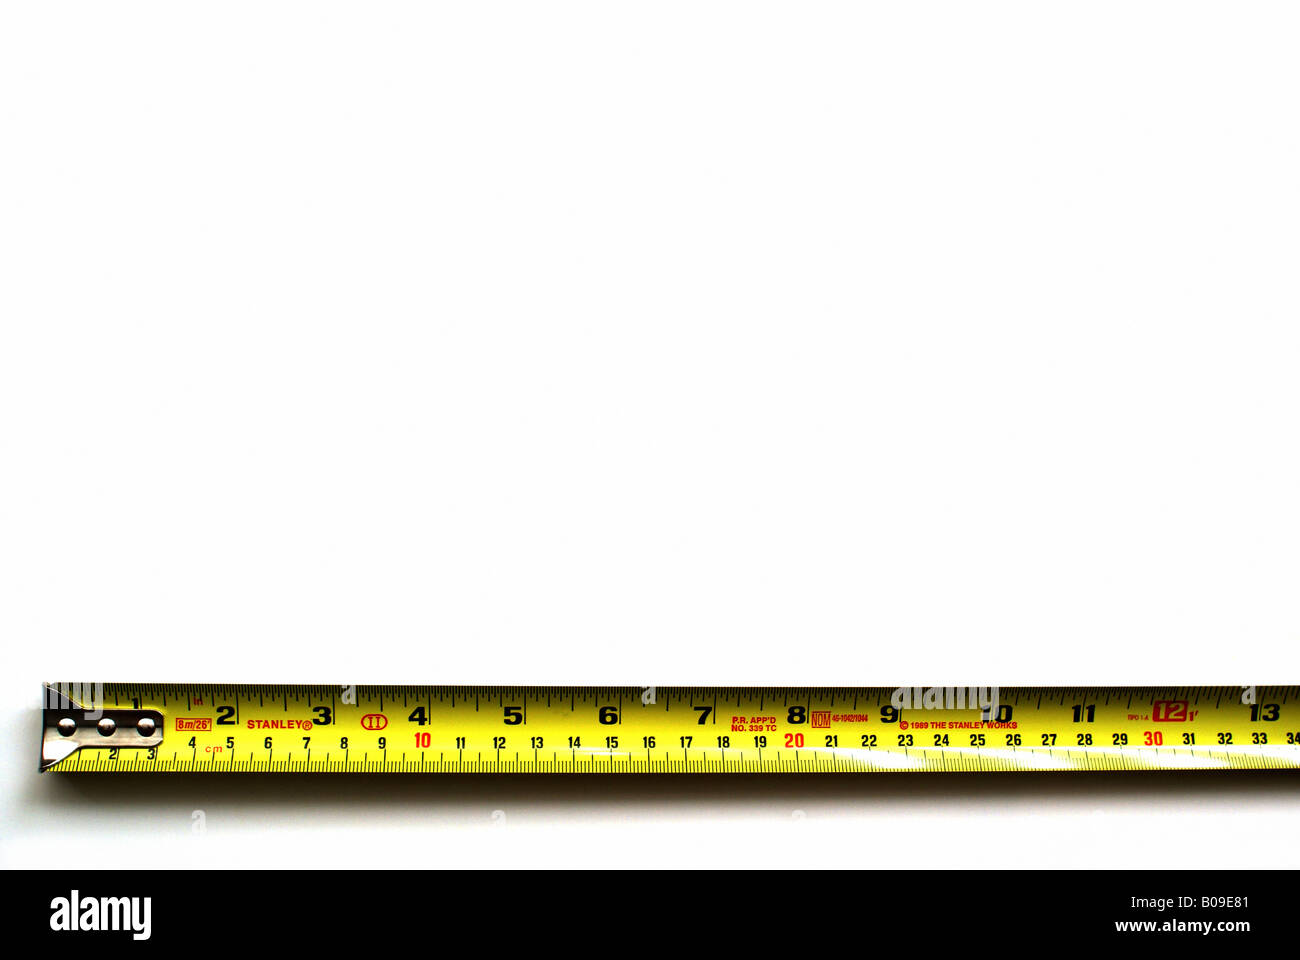 Ruler 12 Inch 12inch Grid With A Division To One Sixteenth Measuring Tool  Ruler Graduation Ruler Grid 12inch Size Indicator Units Stock Illustration  - Download Image Now - iStock